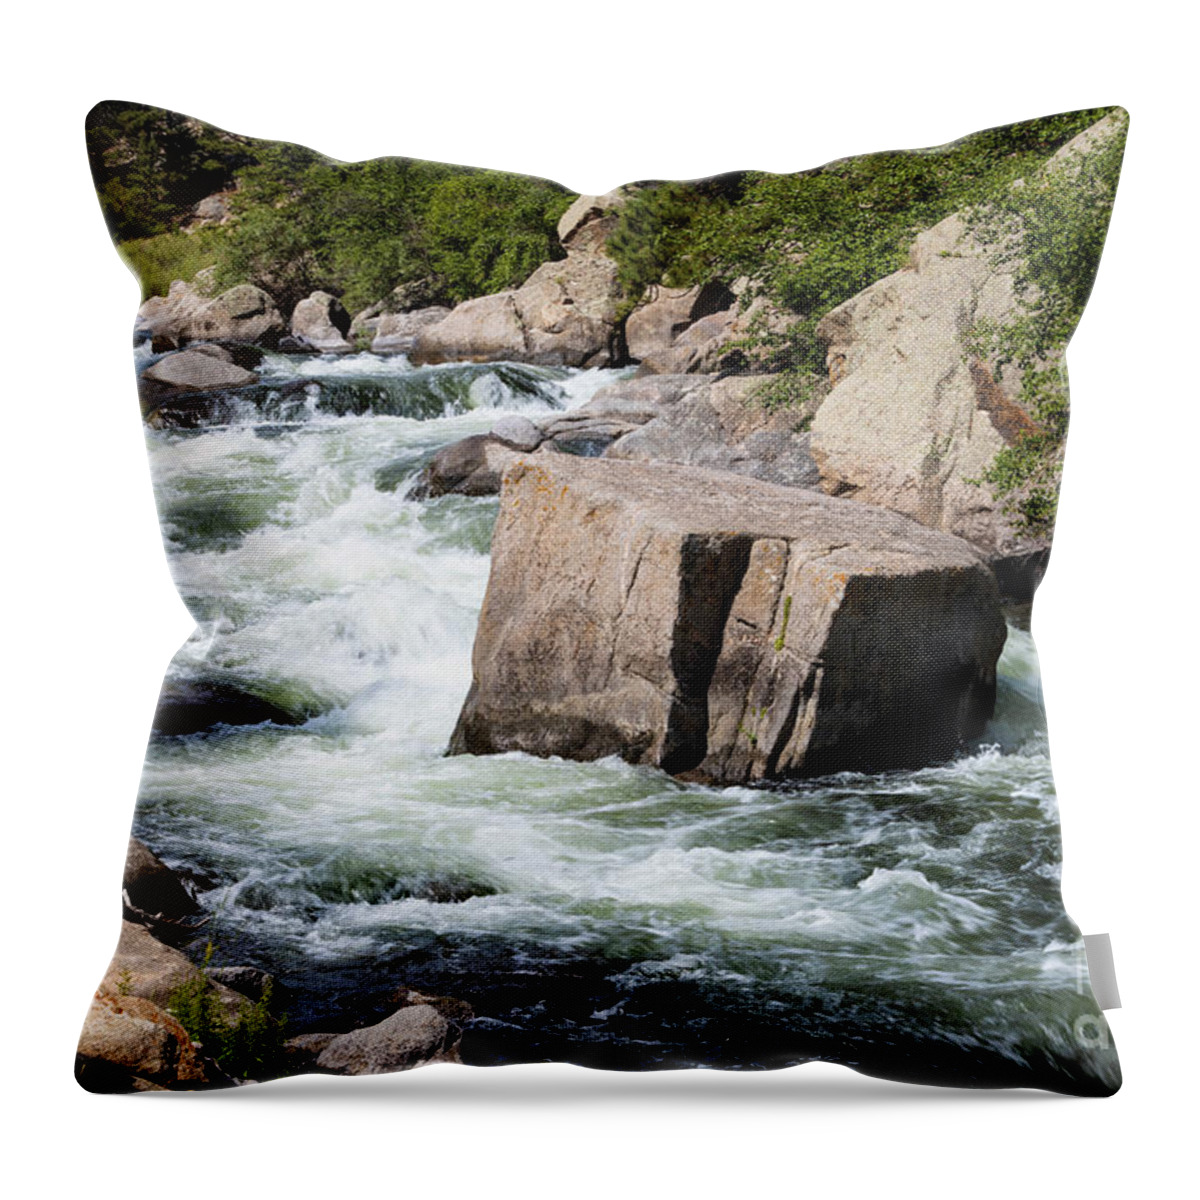 South Platte River Throw Pillow featuring the photograph South Platte River in Eleven Mile Canyon by Steven Krull